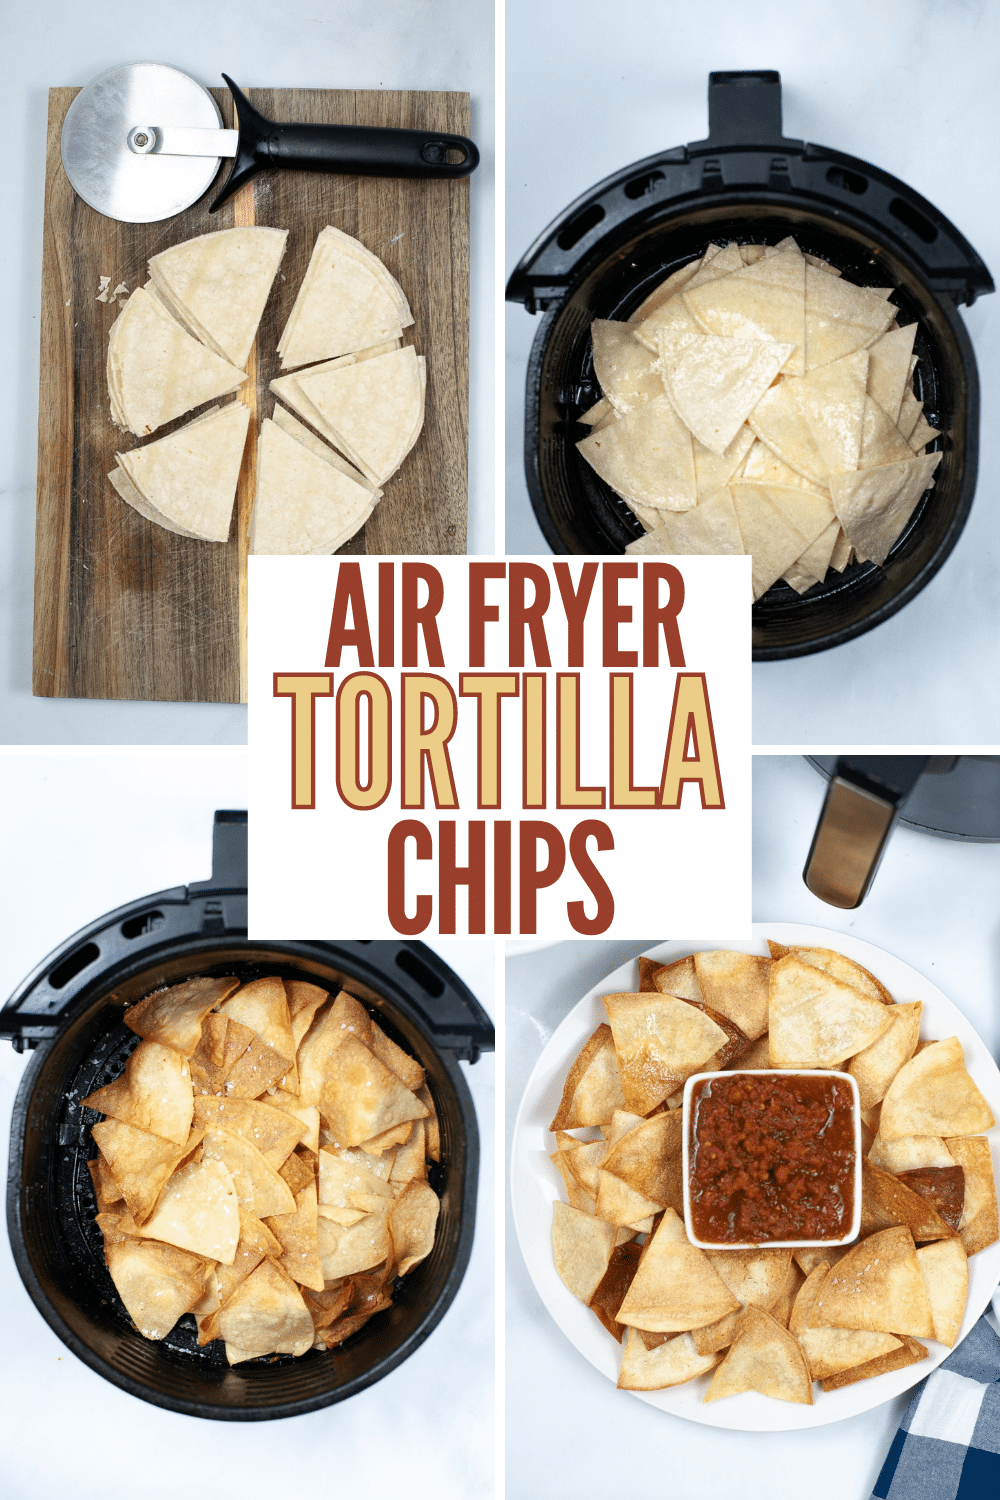 This Air Fryer Tortilla Chips recipe is an easy way to make crispy, crunchy tortilla chips without frying in oil. You won't buy chips again! #airfryer #tortillachips #chips #recipe via @wondermomwannab